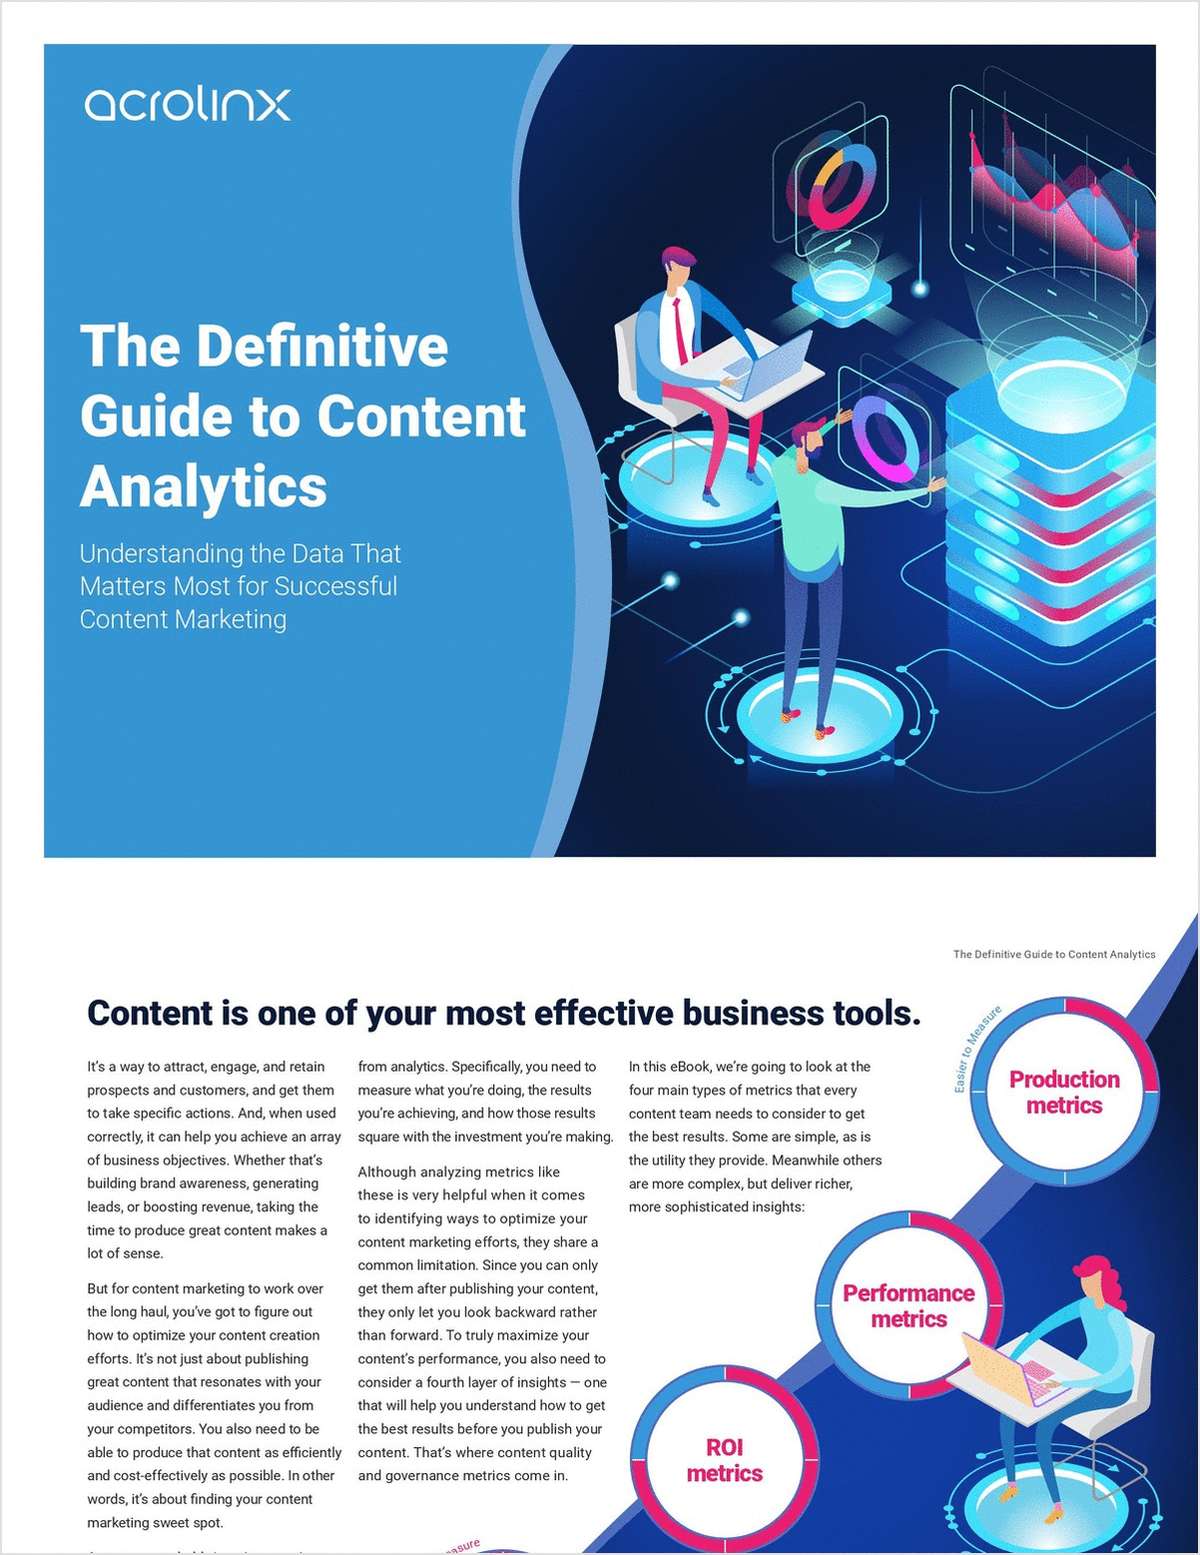 The Definitive Guide to Content Analytics: Understanding the Data That Matters Most for Successful Content Marketing